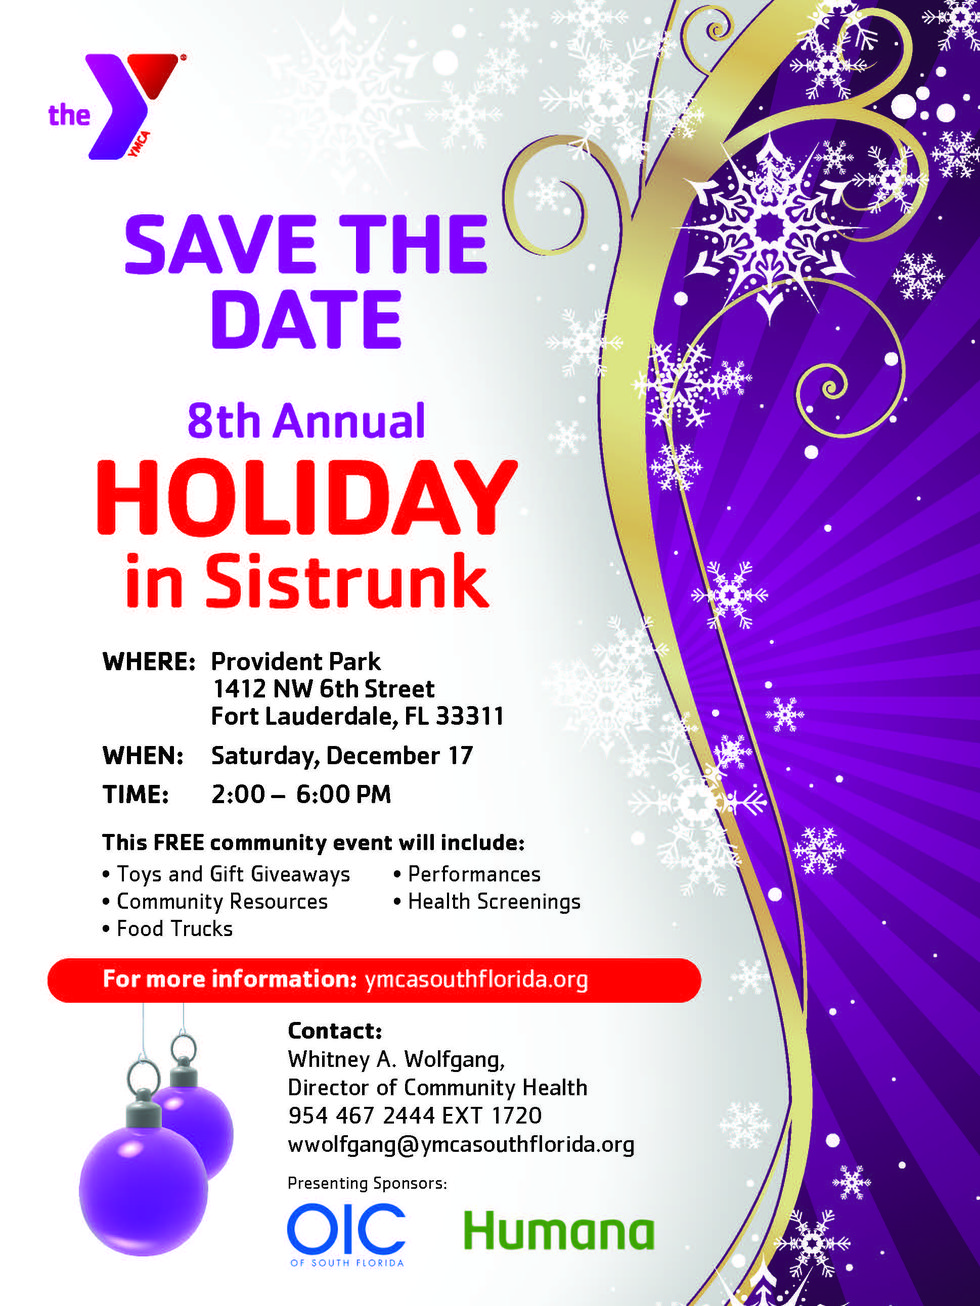 2022 Holiday in Sistrunk Save the Date.jpg